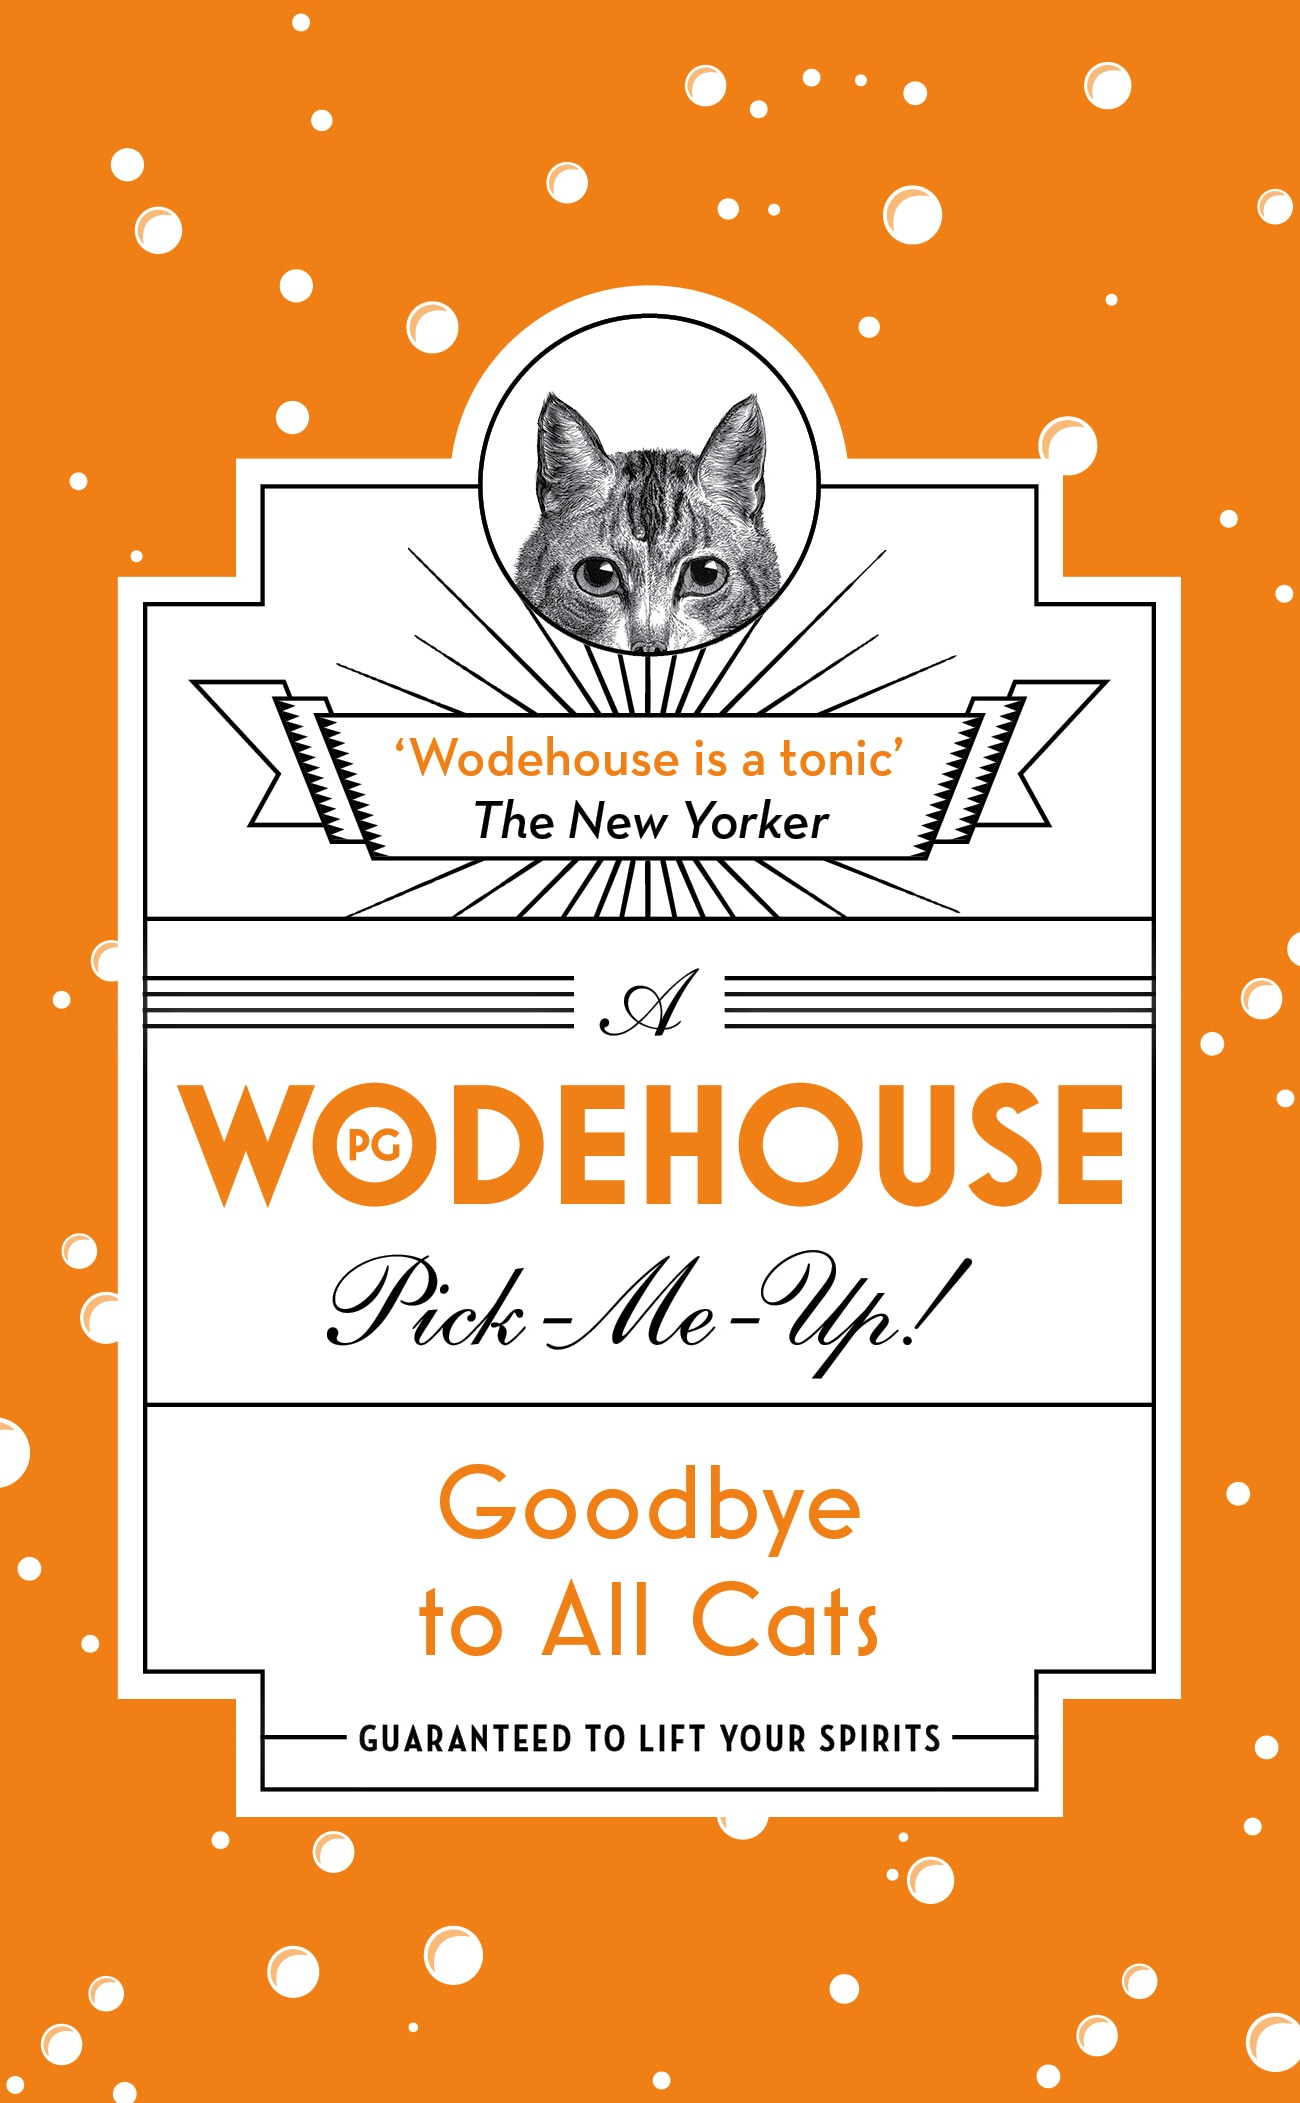 Book “Goodbye to All Cats” by P.G. Wodehouse — November 16, 2017